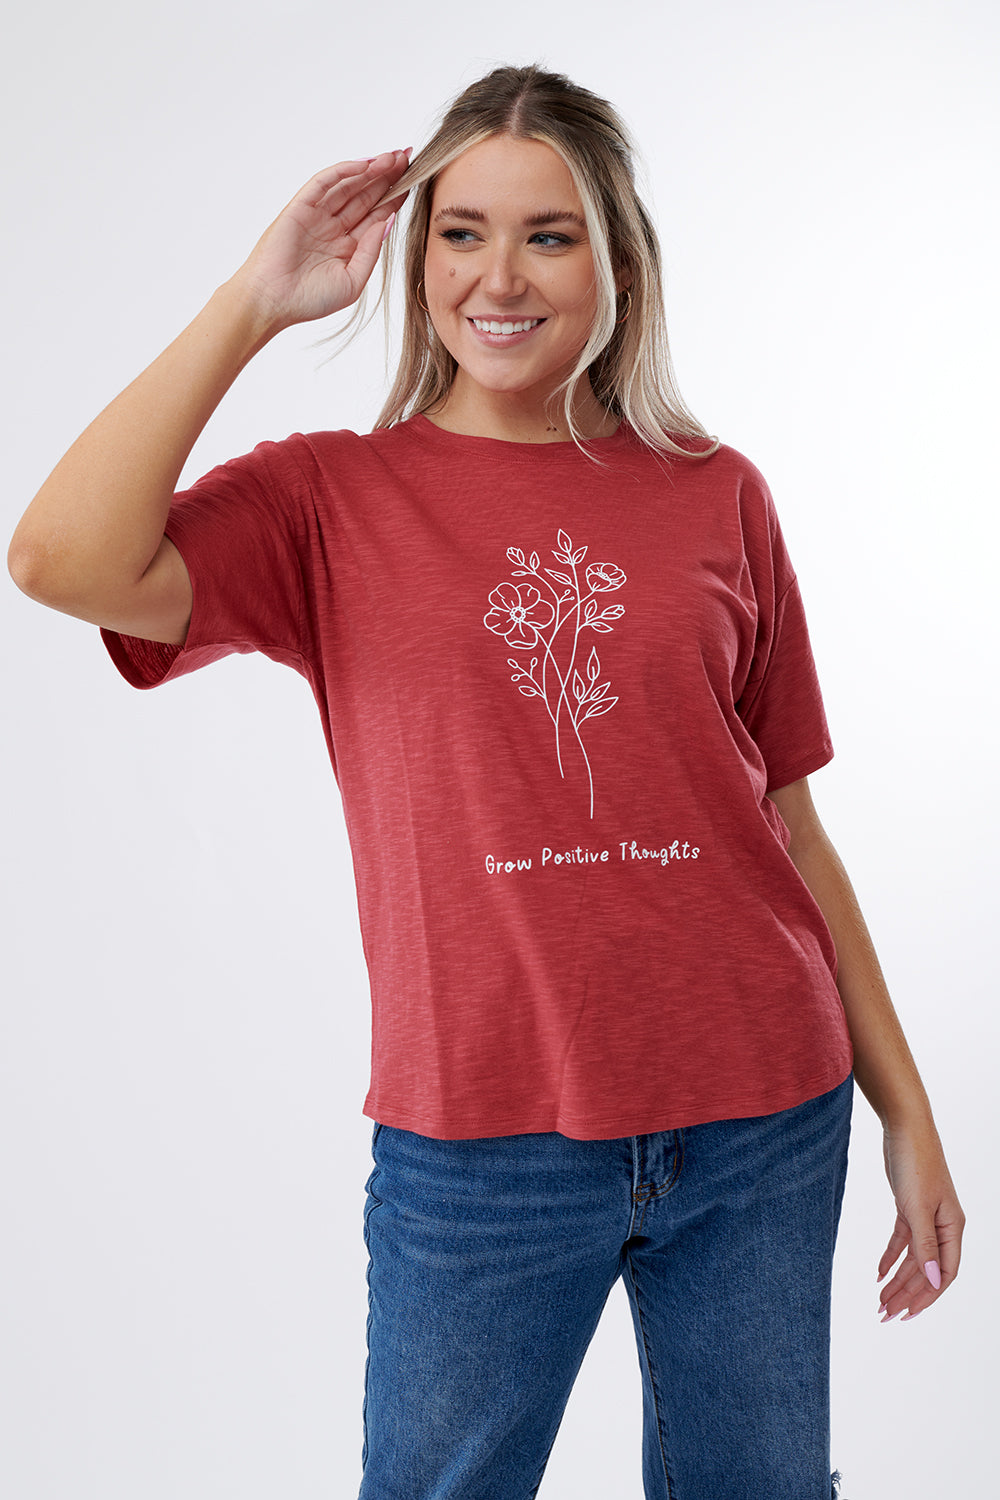 Grow Positive Thoughts Top